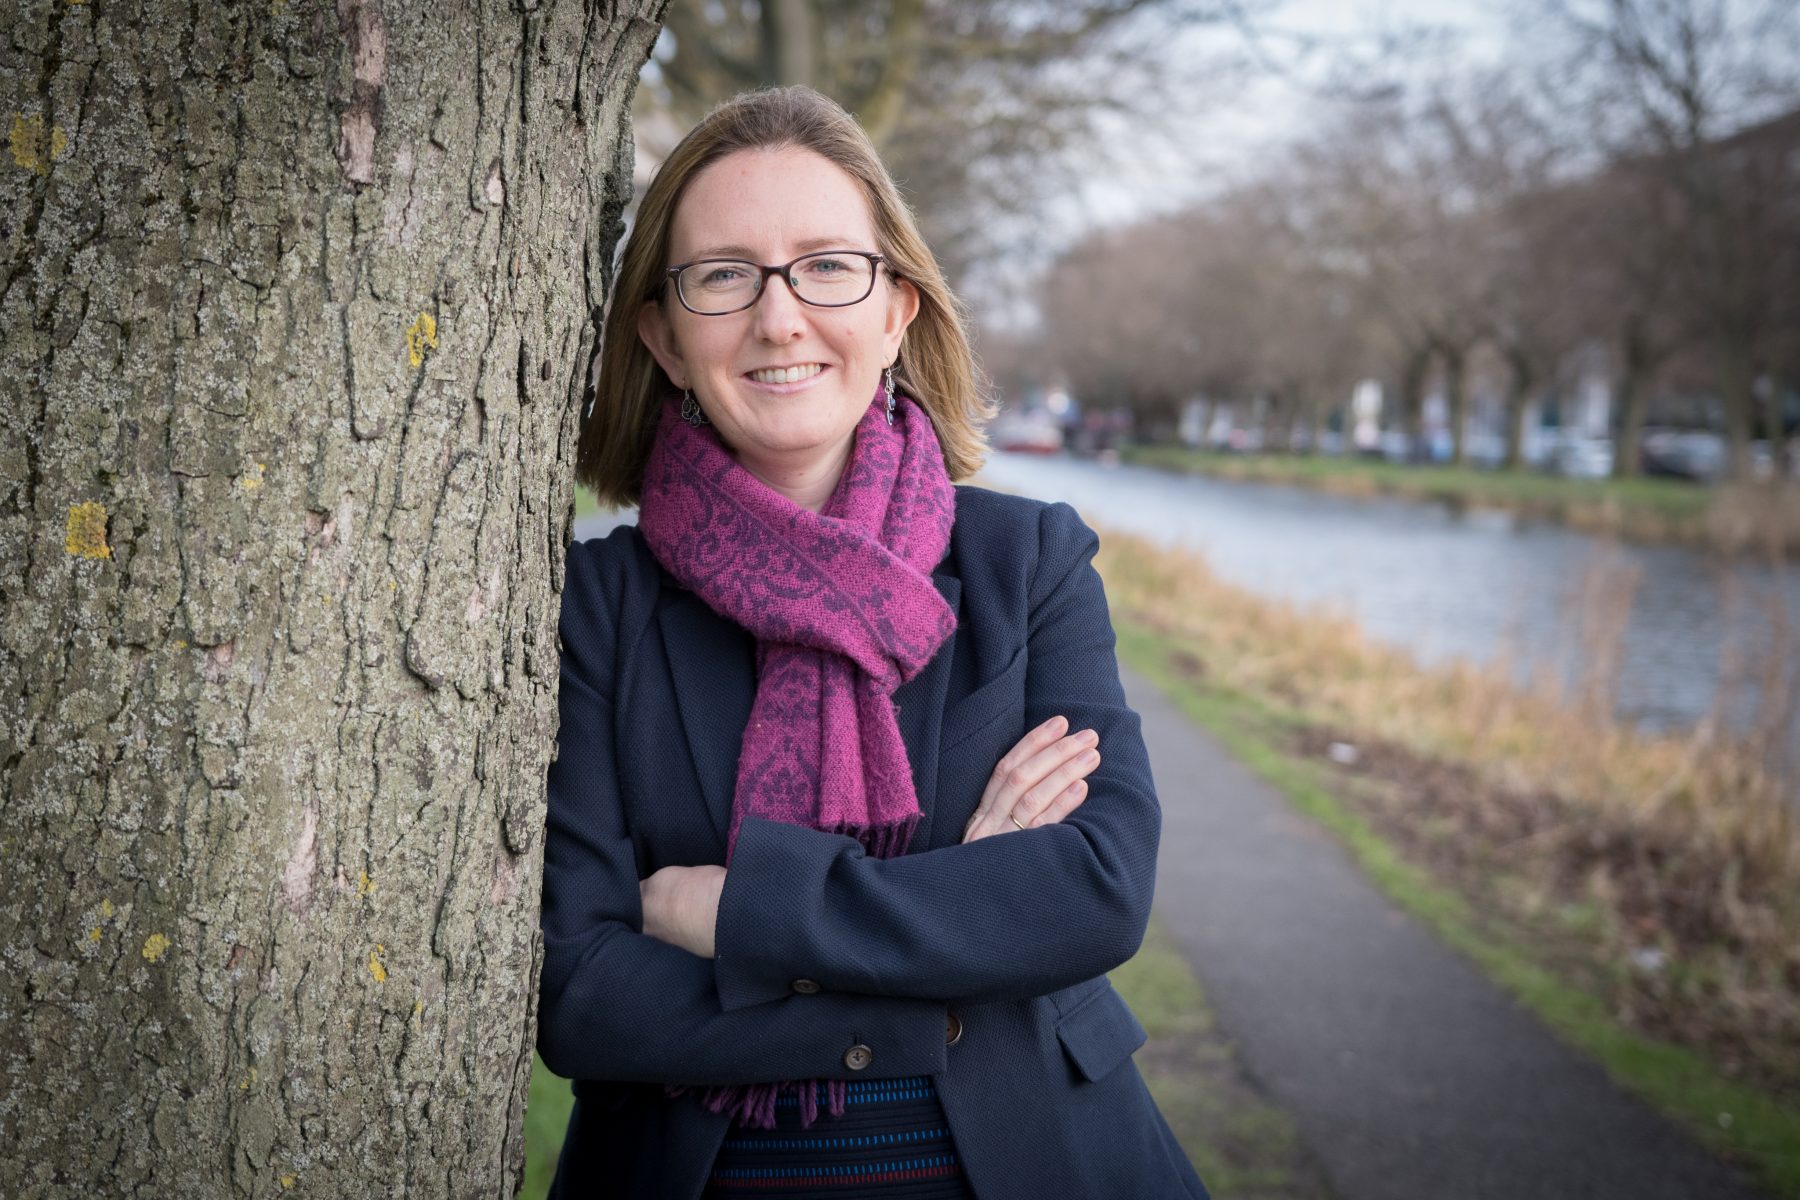 Professor Caitriona Jackman who is a Castletroy native, has been appointed as senior Professor at the Dublin Institute for Advanced Studies School of Cosmic Physics, the first woman to ever become senior professor of physics in the 81-year history of the Institute.